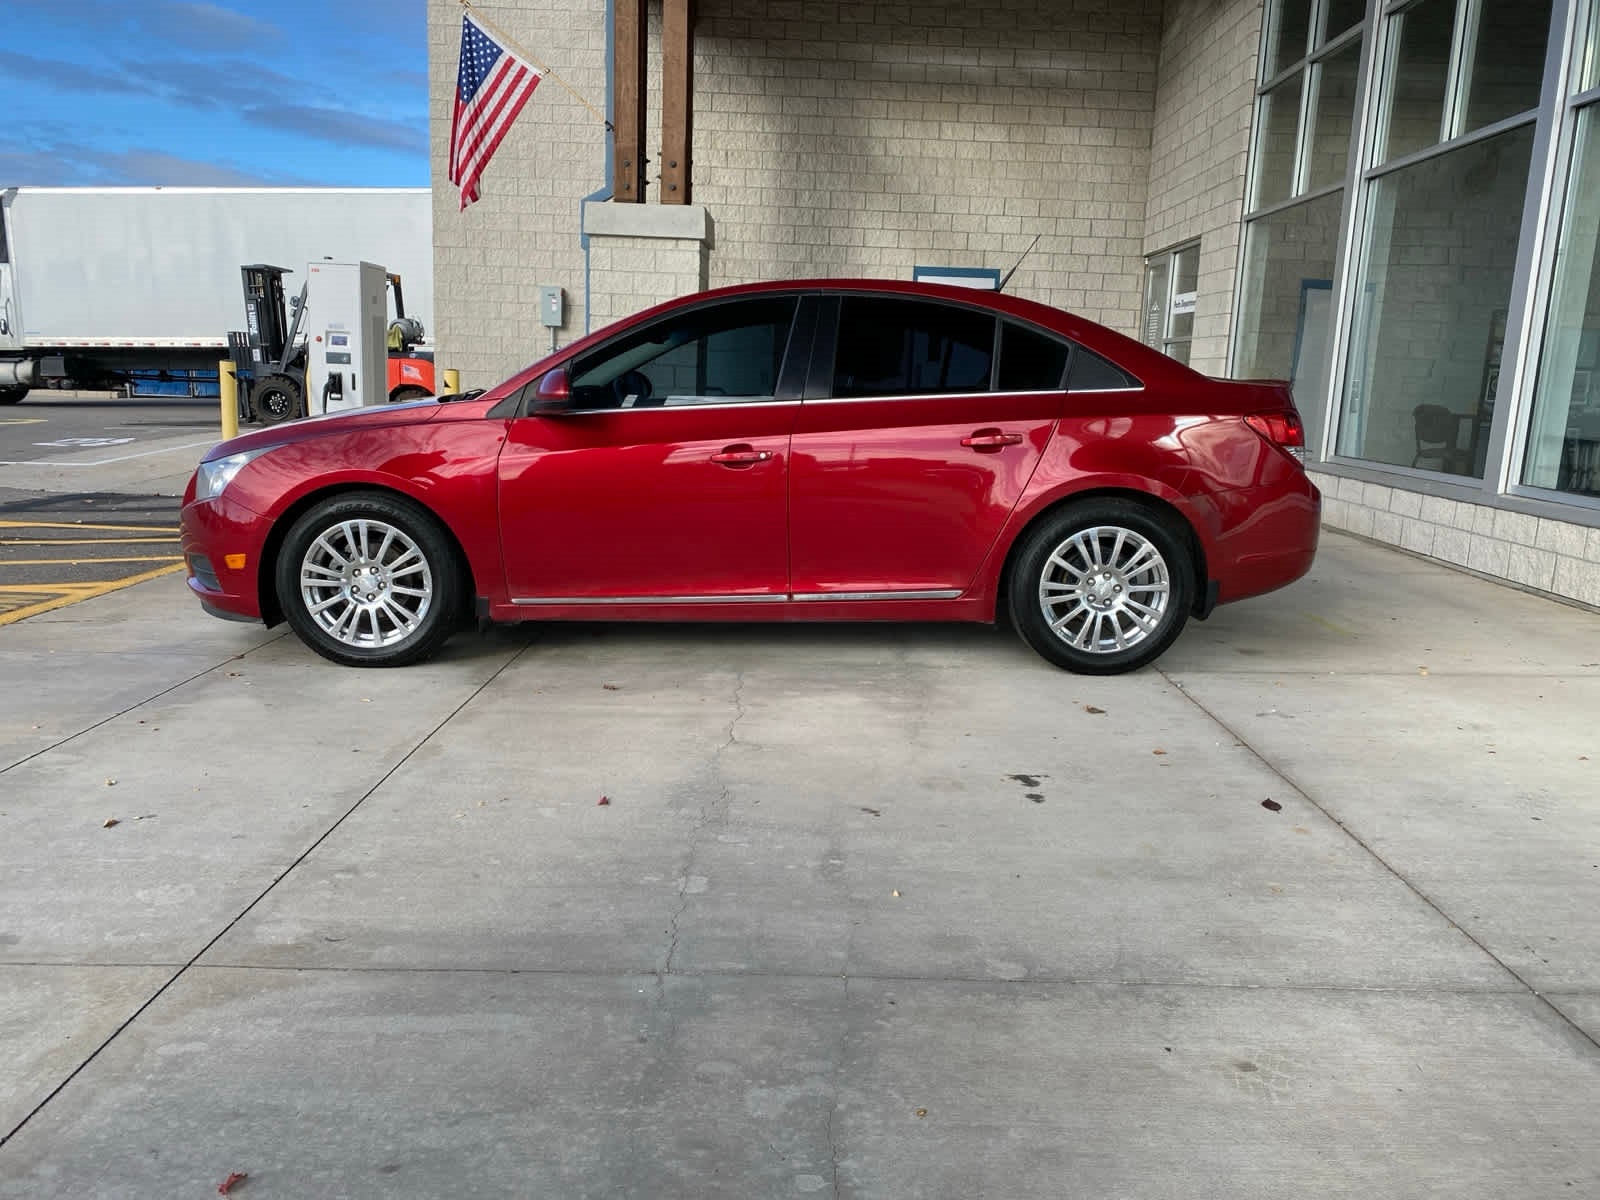 Used 2013 Chevrolet Cruze ECO with VIN 1G1PH5SBXD7183528 for sale in Missoula, MT